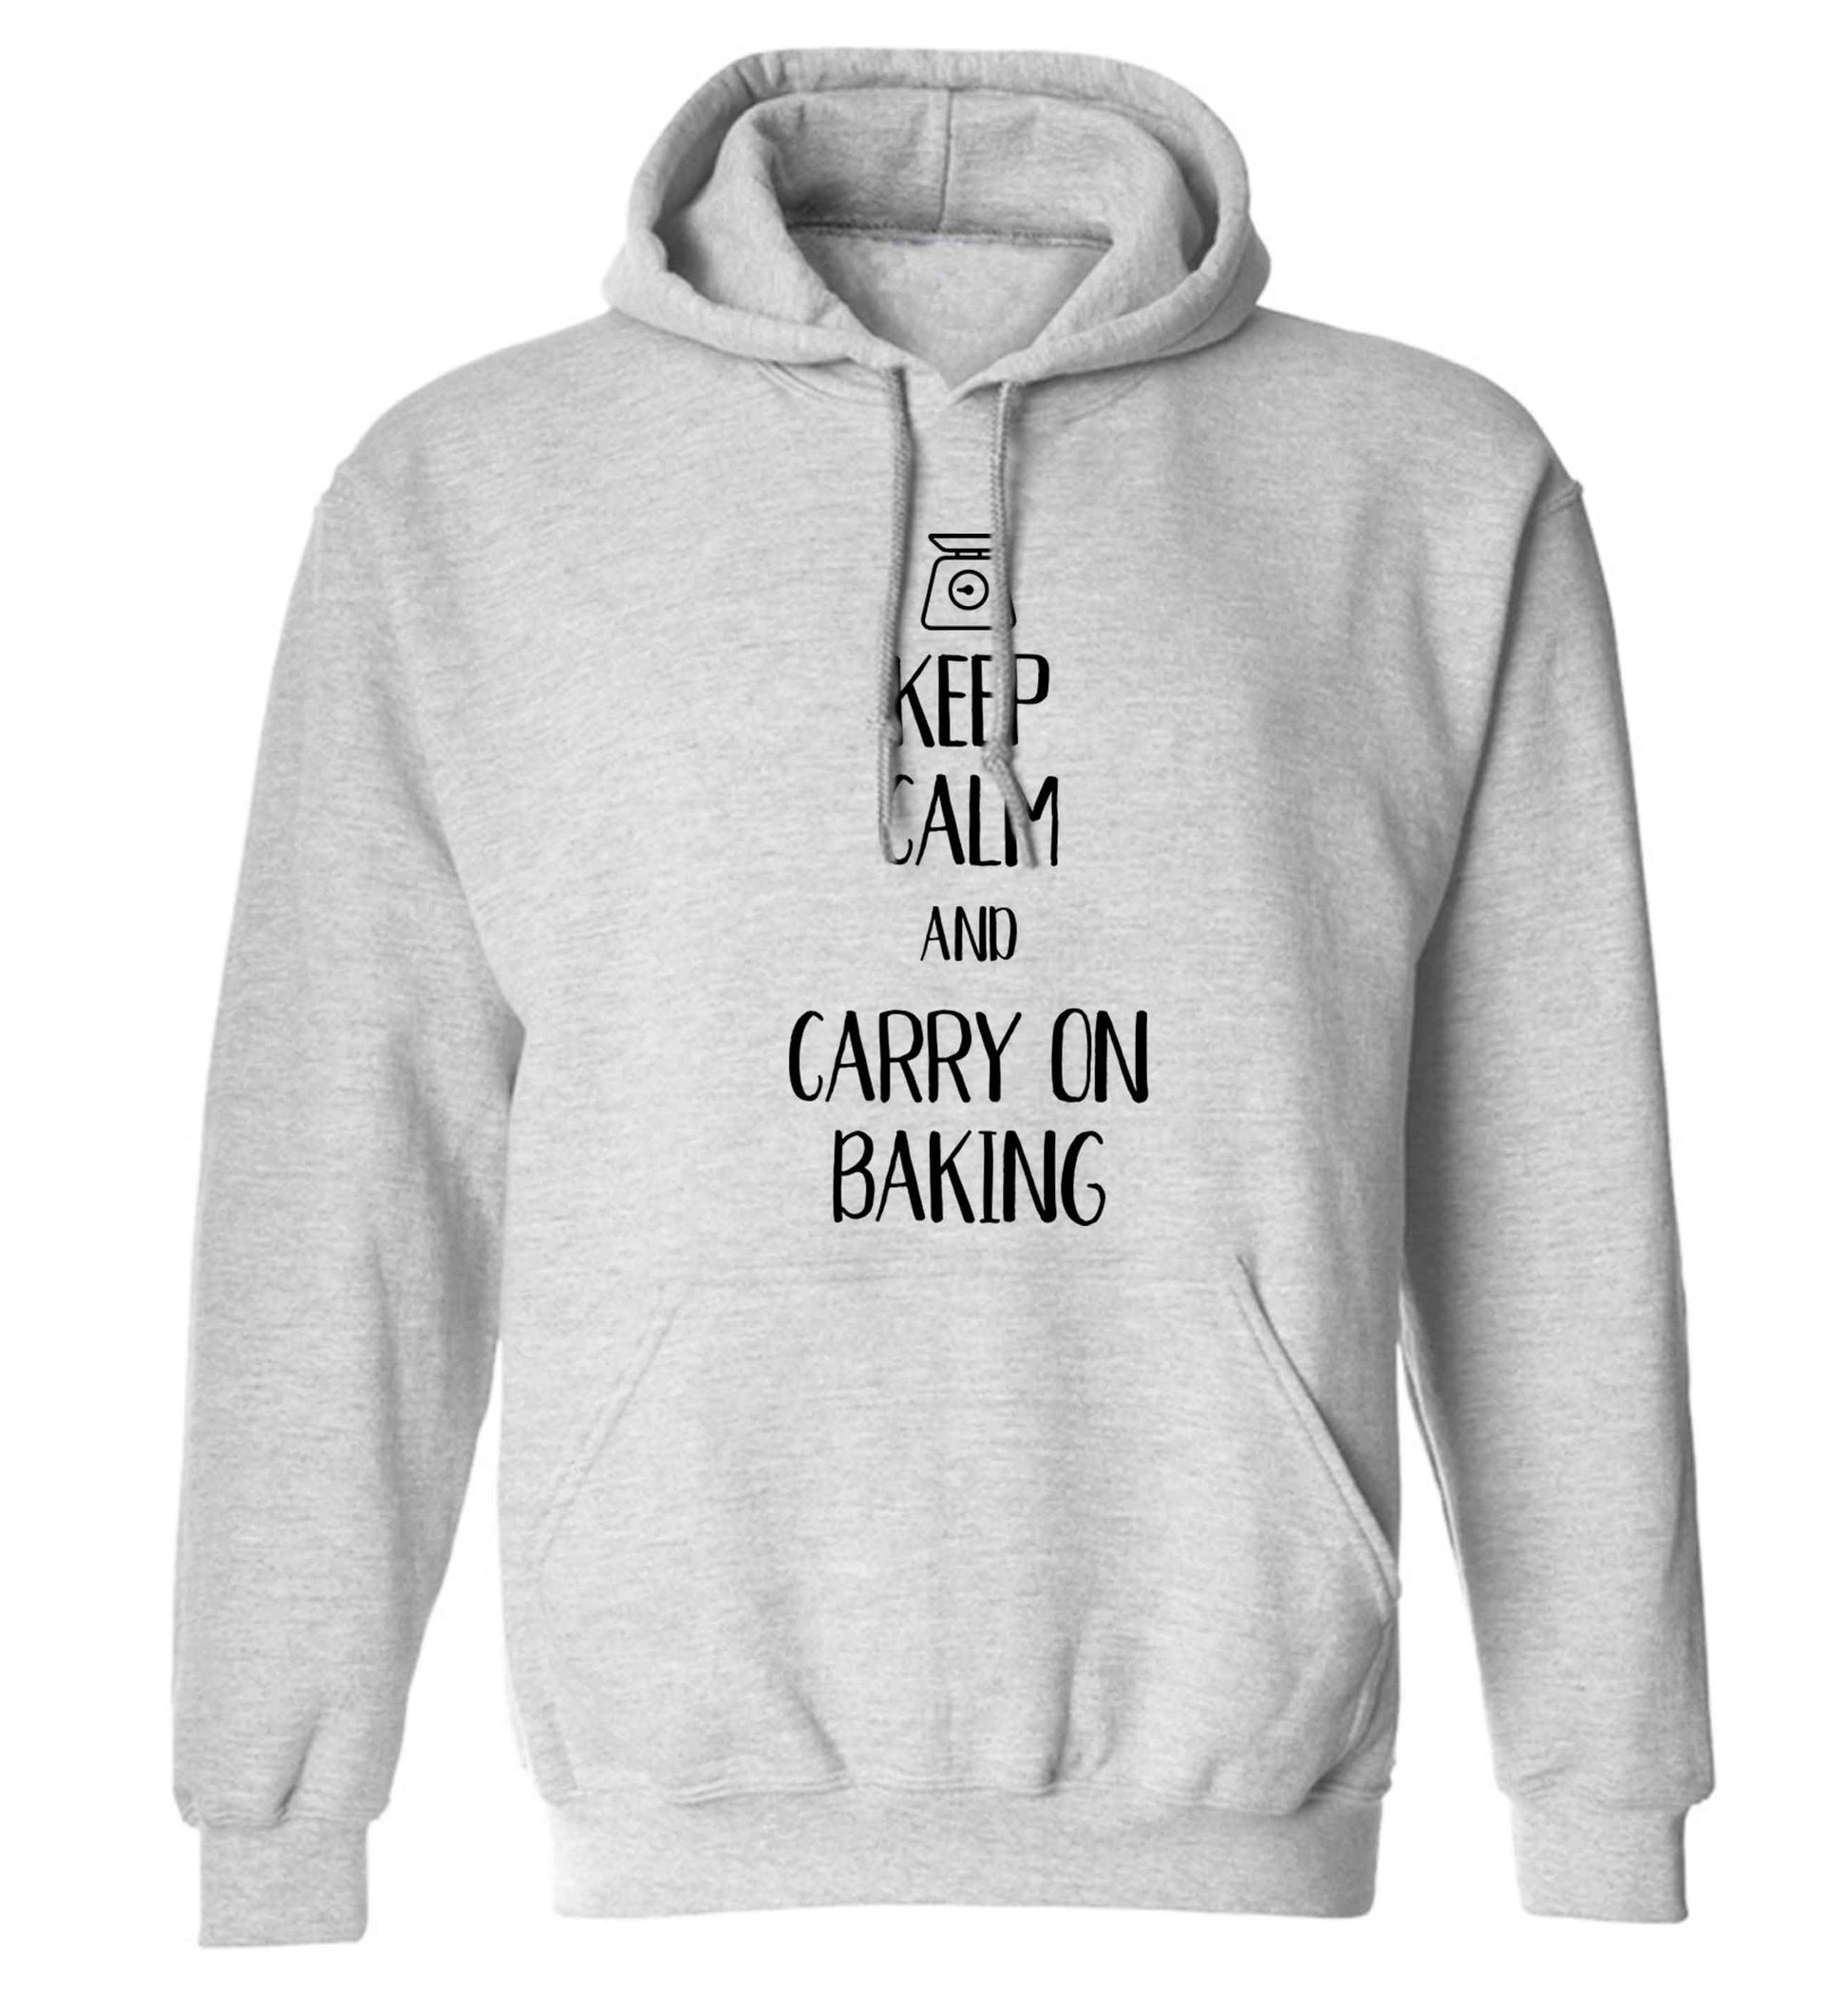 Keep calm and carry on baking adults unisex grey hoodie 2XL